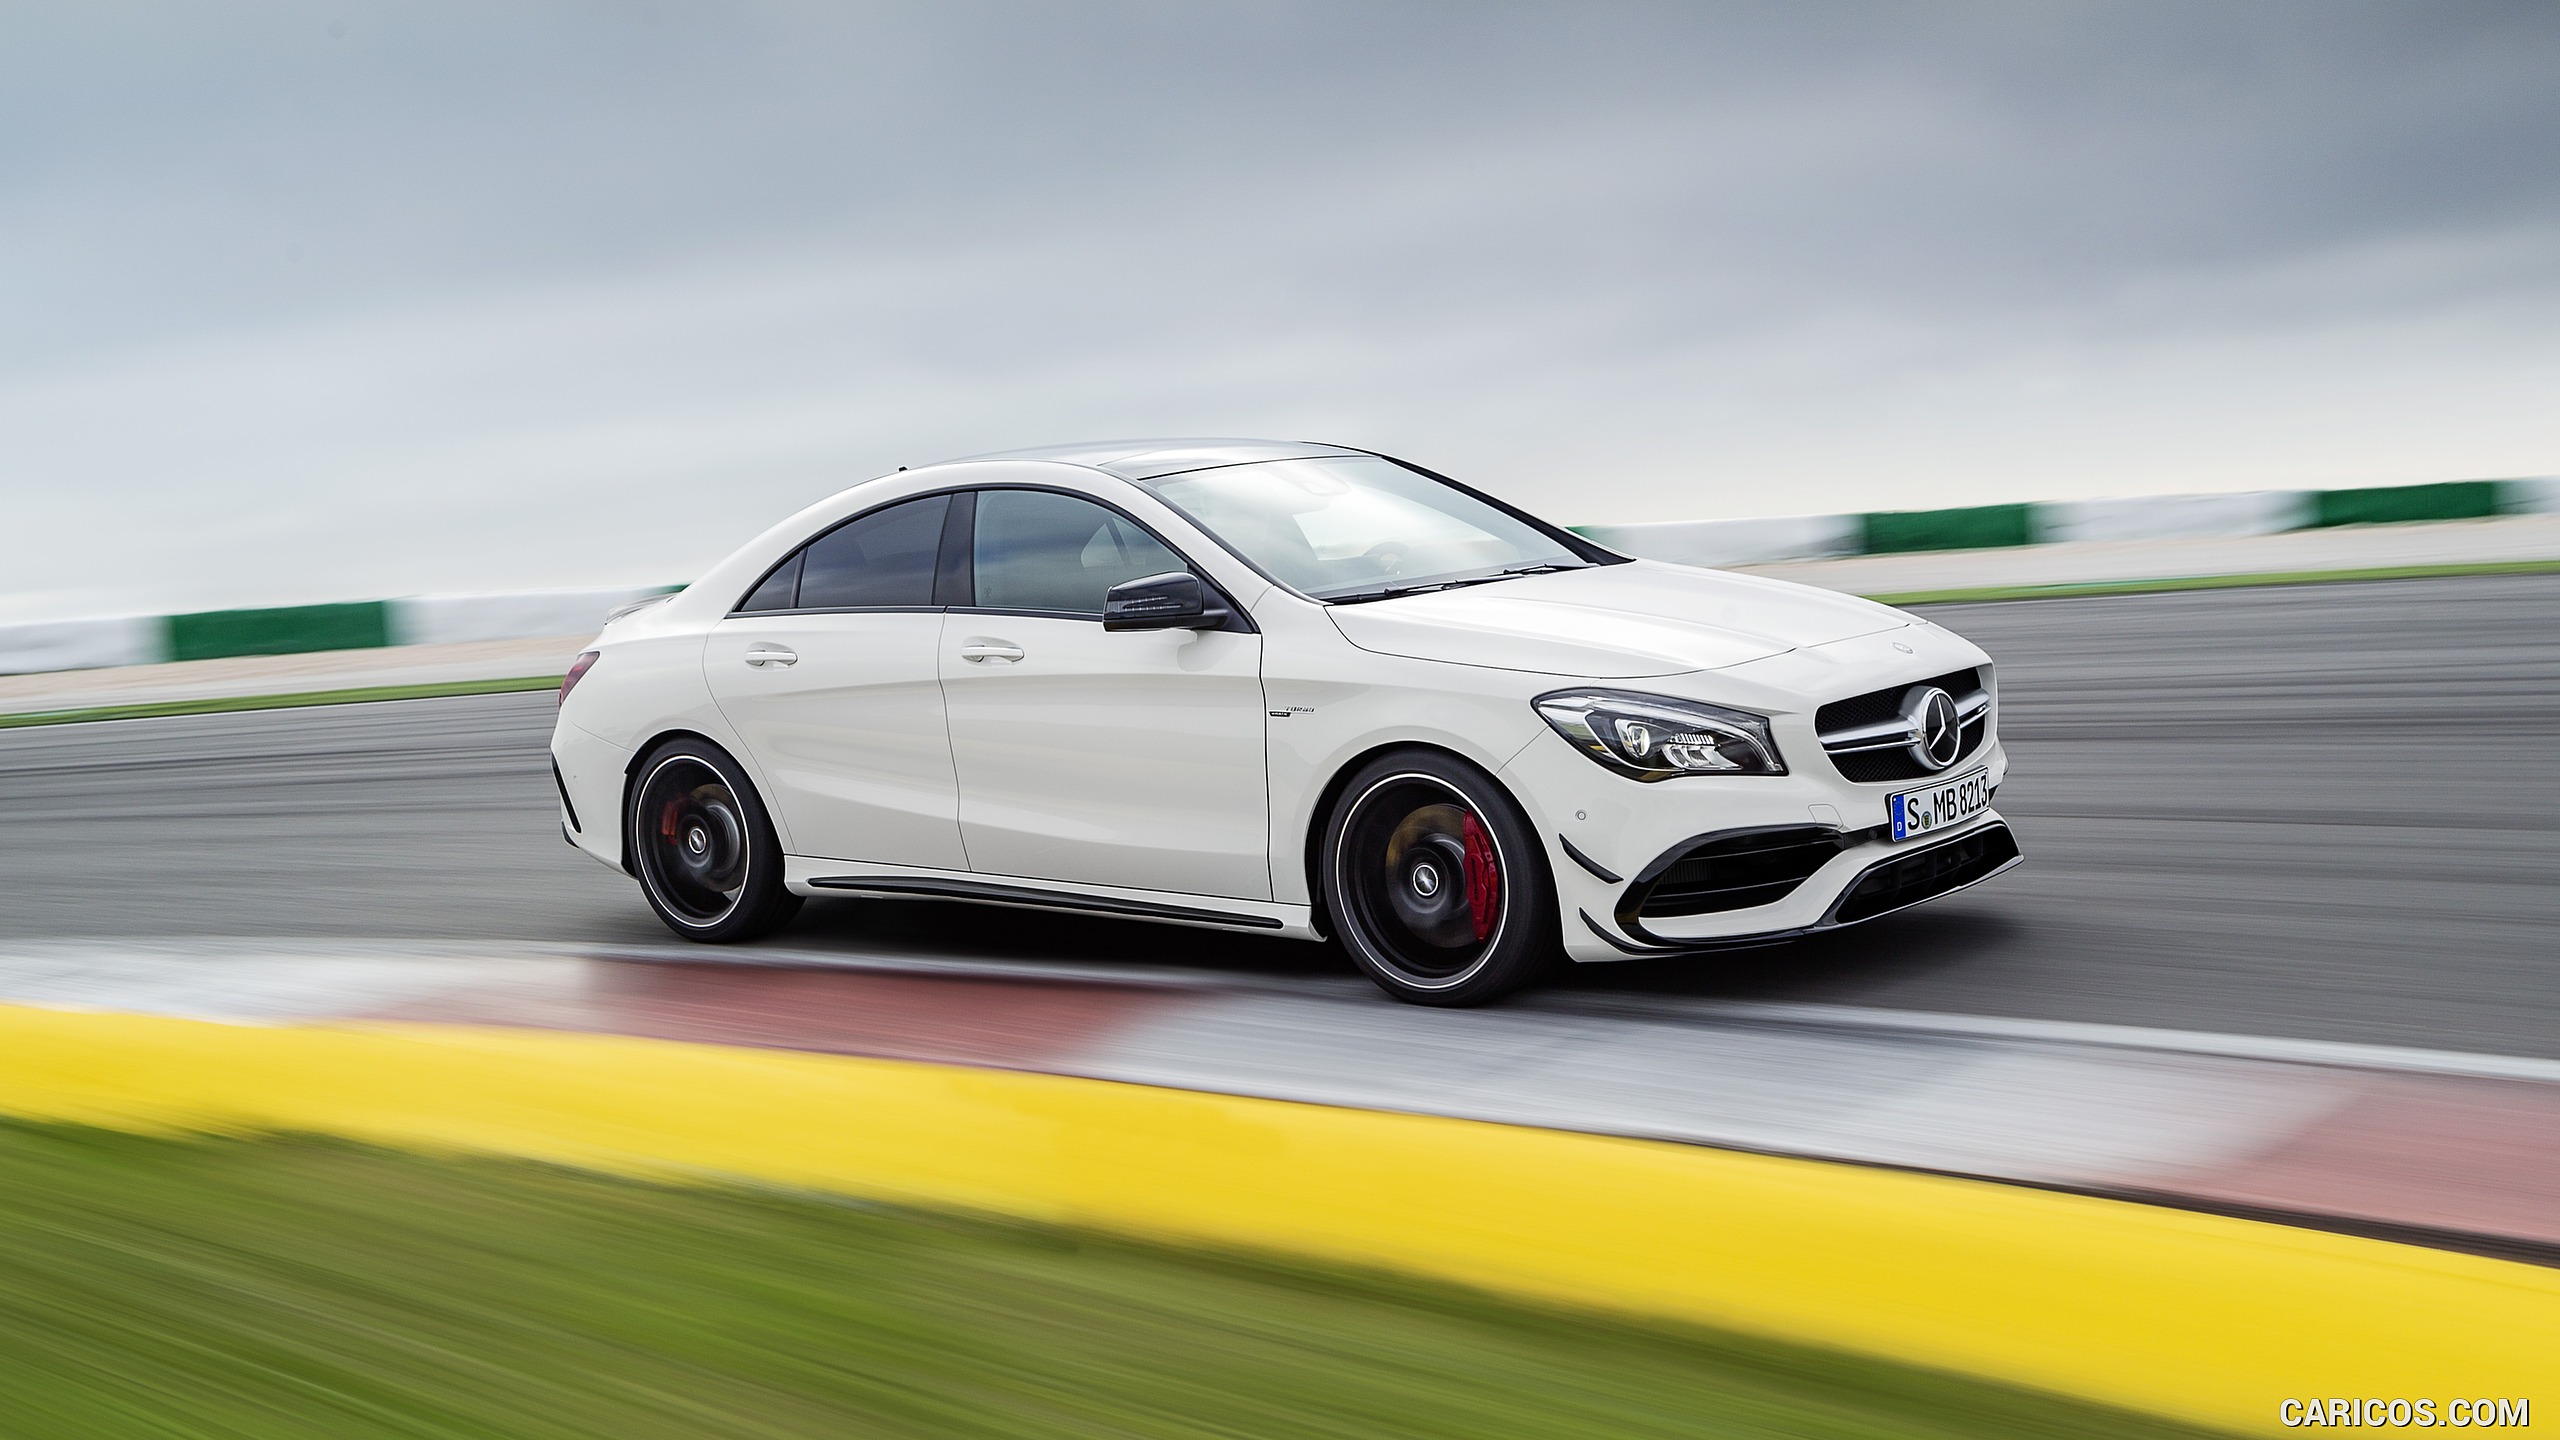 2017 Mercedes-AMG CLA 45 Coupé with Aerodynamics Package (Chassis: C117, Color: Diamond White) - Side, #2 of 11